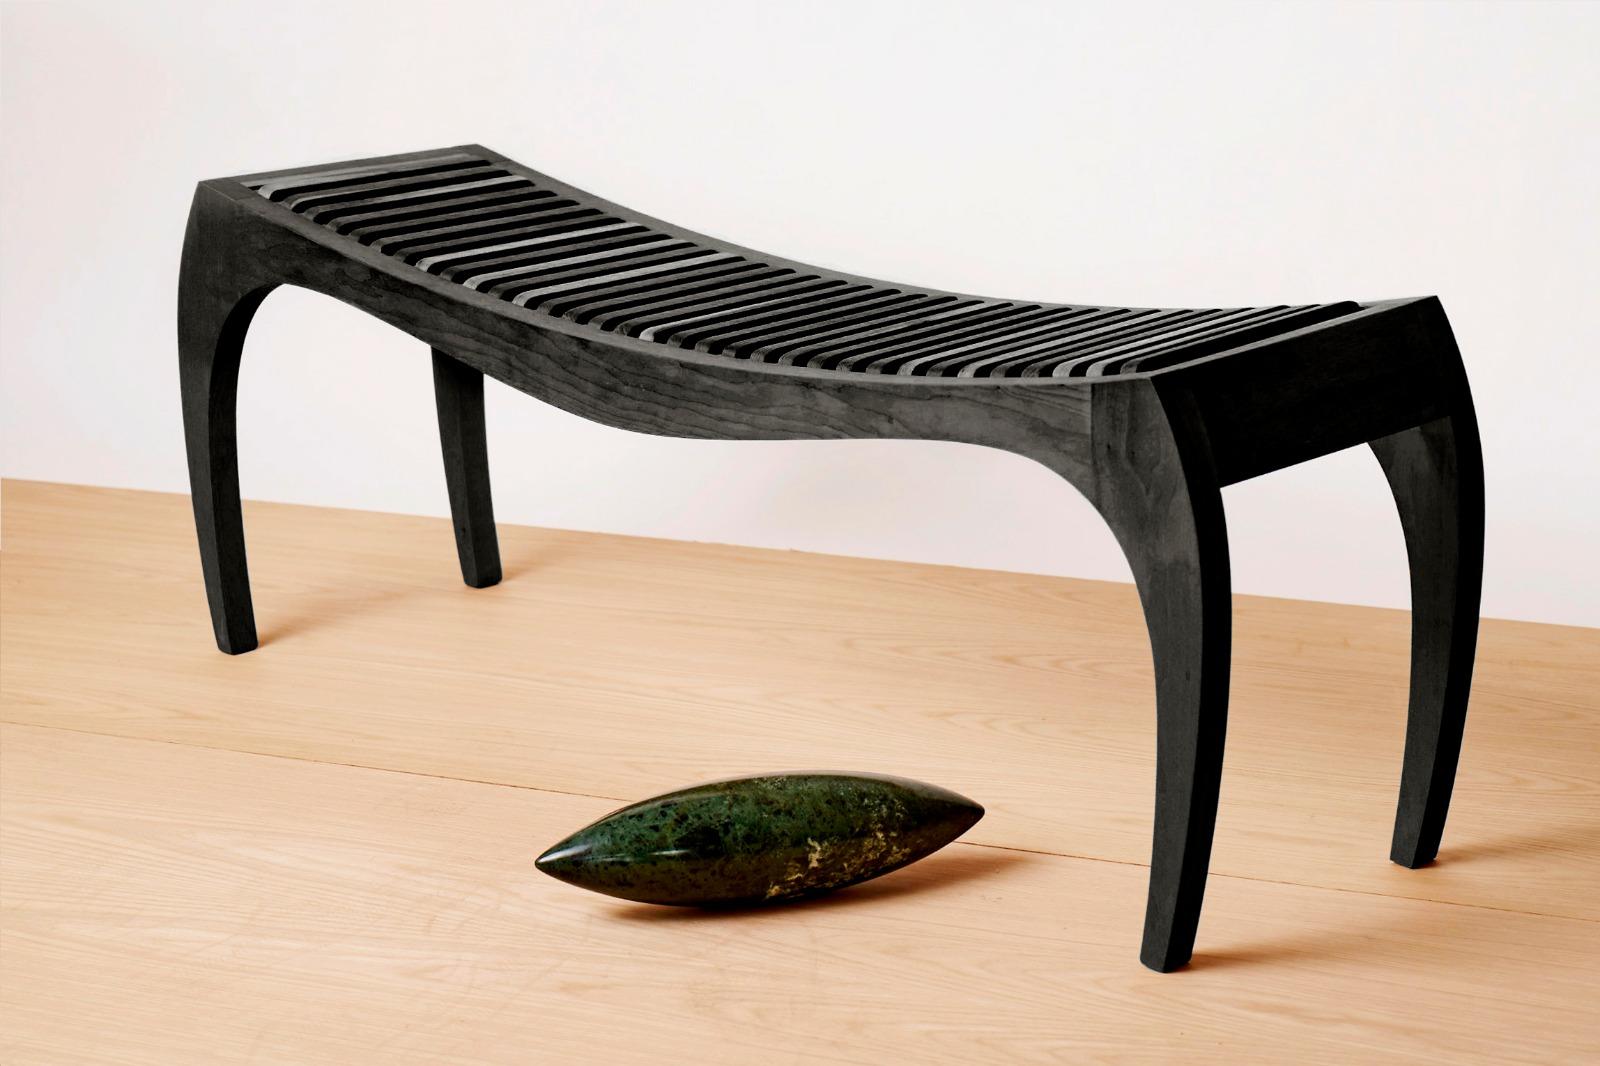 Black bench rumbo by Jean-Baptiste Van den Heede
Unique piece signed and numbered
Dimensions: L 118 x H 42 x W 31 cm 
Materials: solid wood

Jean-Baptiste Van den Heede defines himself as a cabinetmaker-designer and an artist of academic